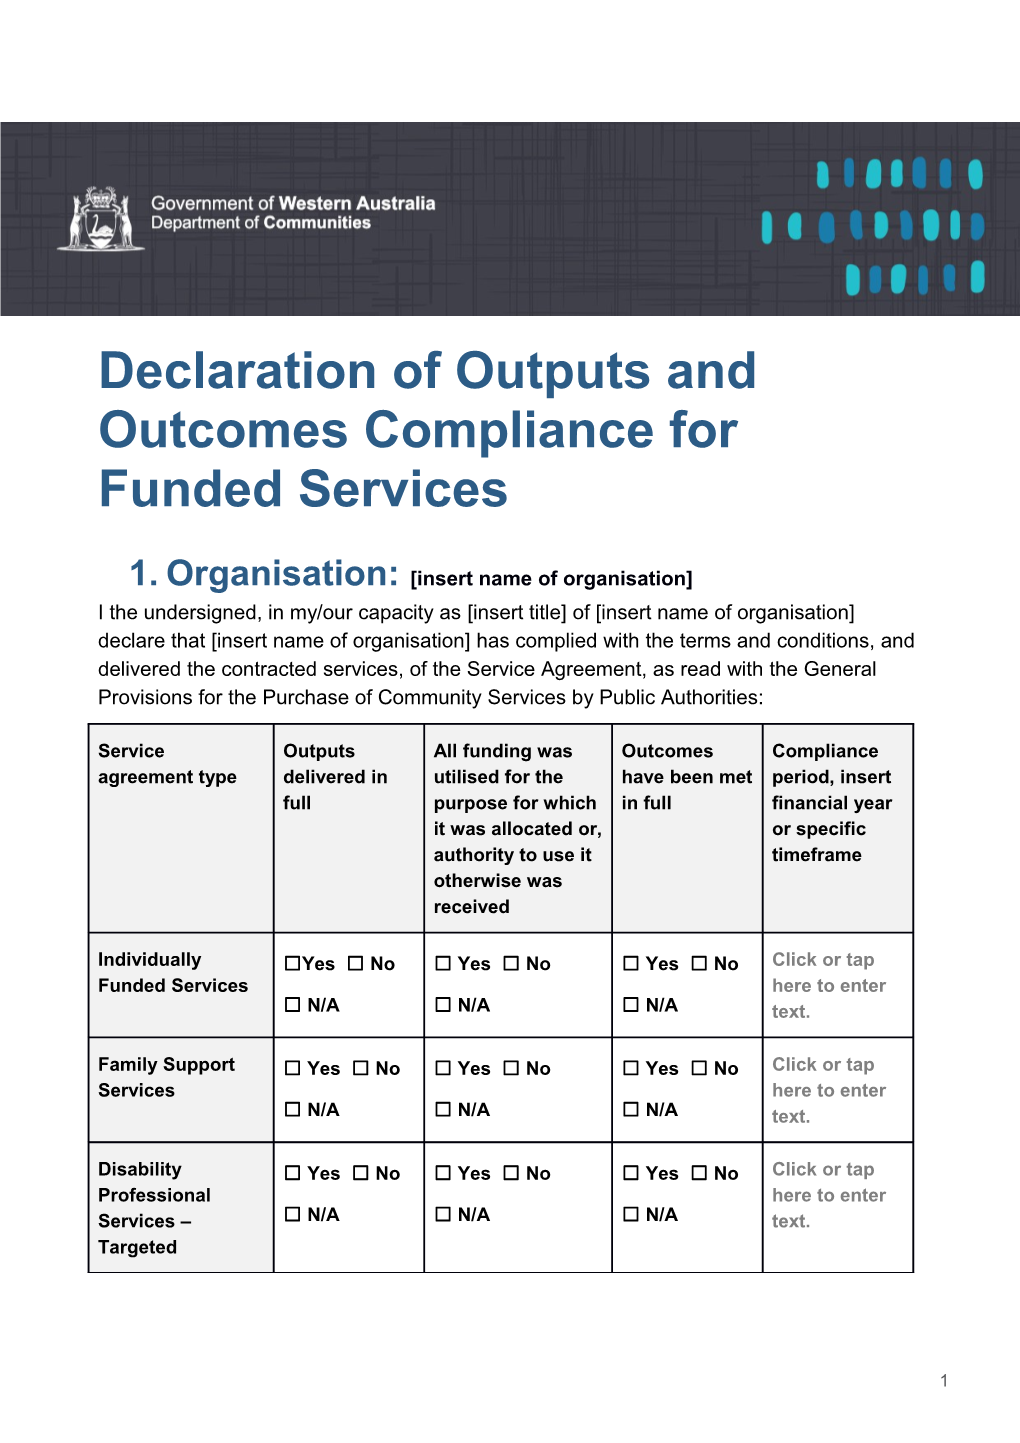 Declaration of Outputs and Outcomes Compliance for Funded Services 2018